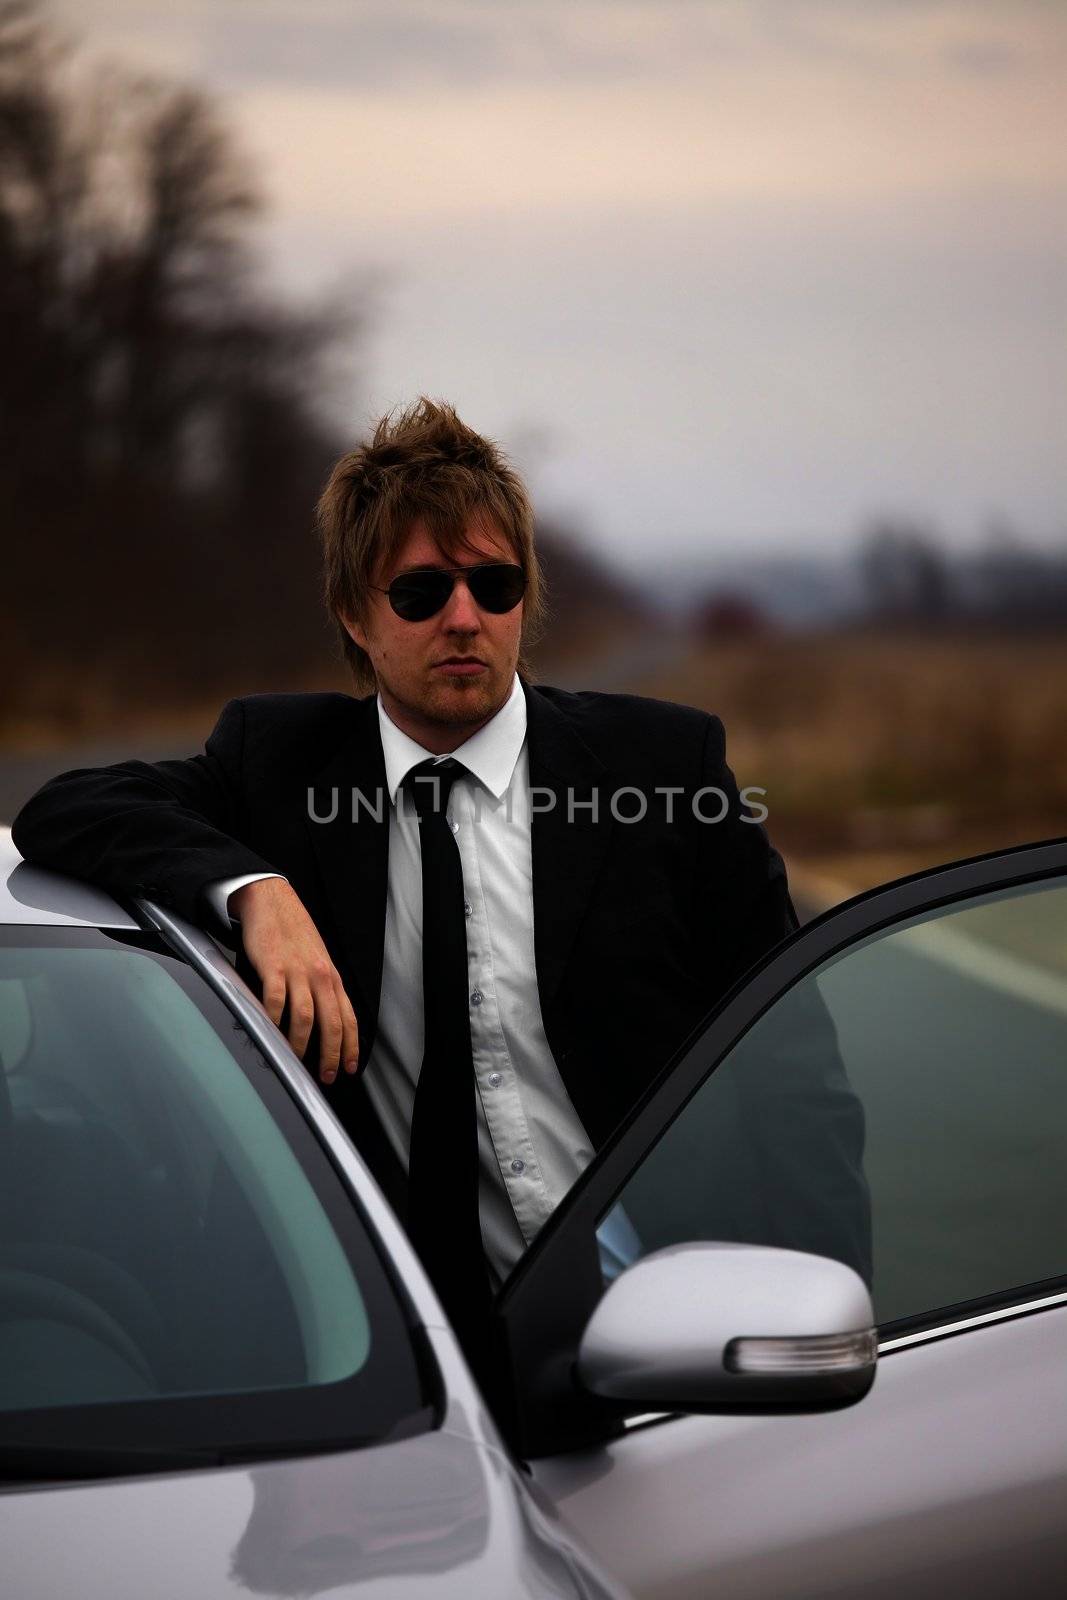 Man in suit standing next to the car